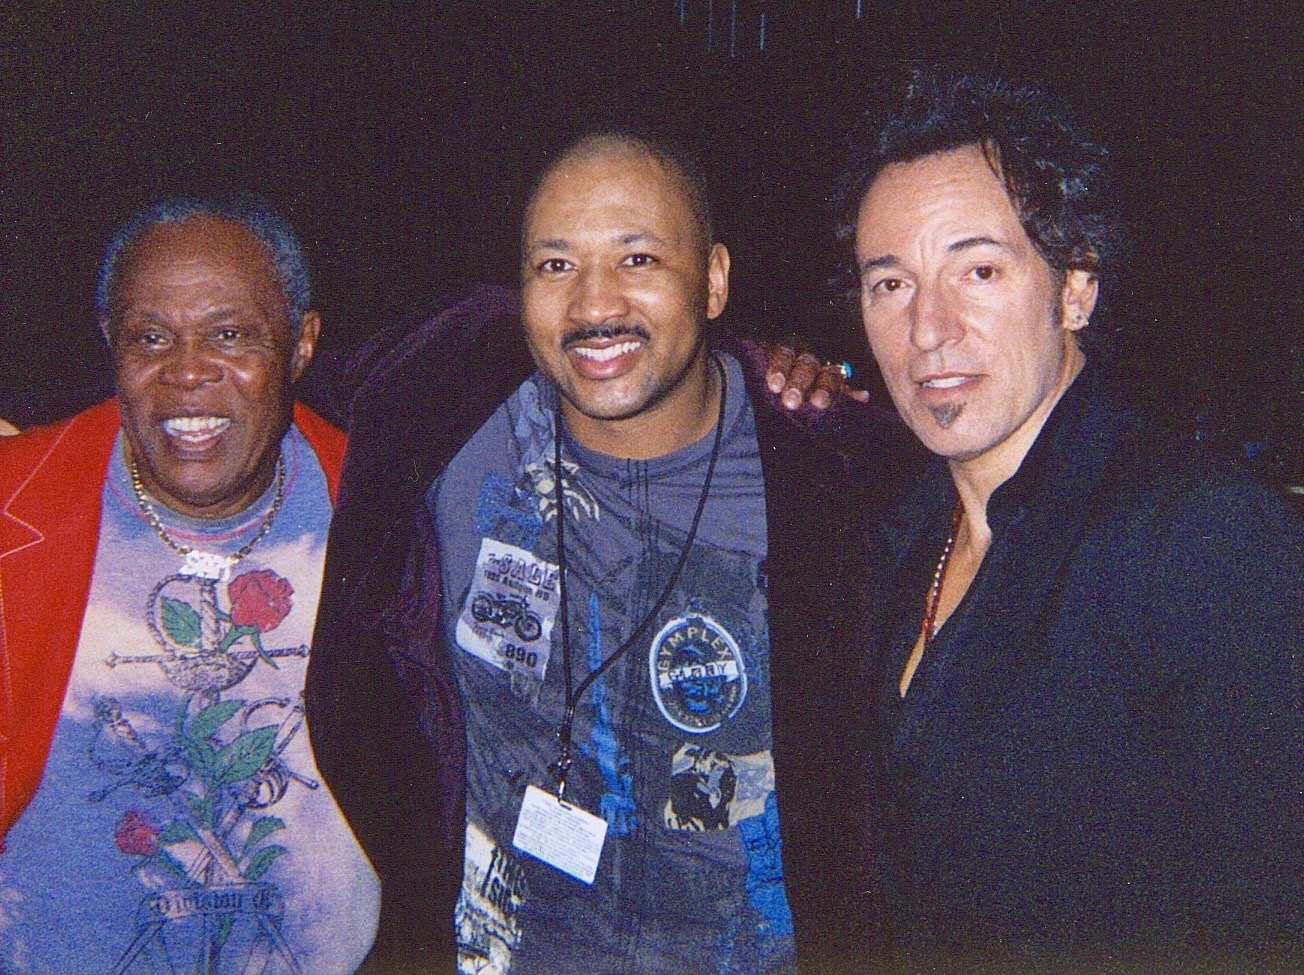 Alex Al with Legends Sam Moore and Bruce Springsteen.